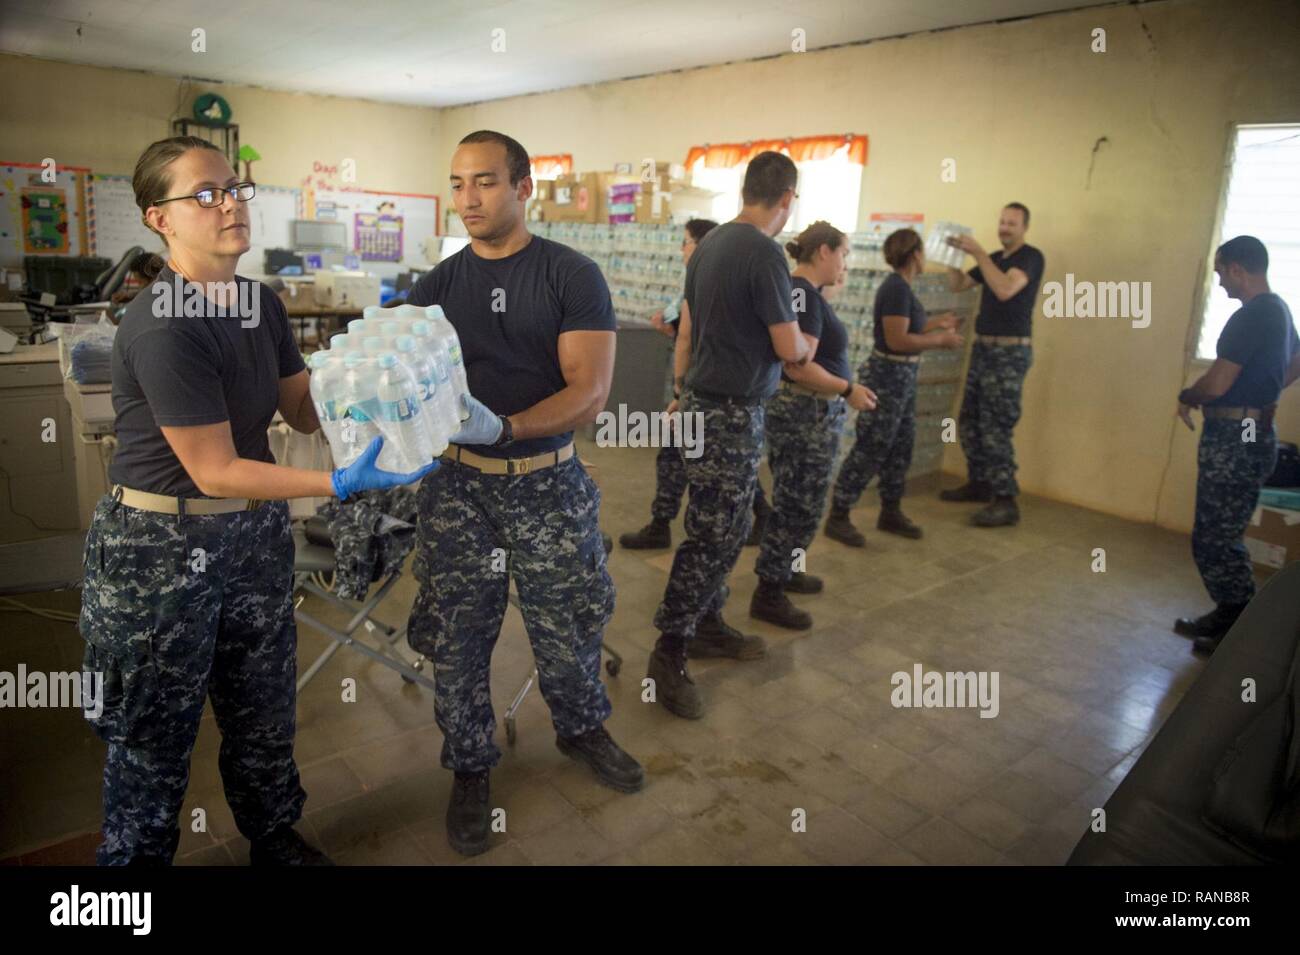 TRUJILLO, Honduras (Feb. 20, 2017) – Sailors pass drinking water at the Continuing Promise 2017 (CP-17) medical site in support of CP-17's visit to Trujillo, Honduras. CP-17 is a U.S. Southern Command-sponsored and U.S. Naval Forces Southern Command/U.S. 4th Fleet-conducted deployment to conduct civil-military operations including humanitarian assistance, training engagements, and medical, dental, and veterinary support in an effort to show U.S. support and commitment to Central and South America. Stock Photo